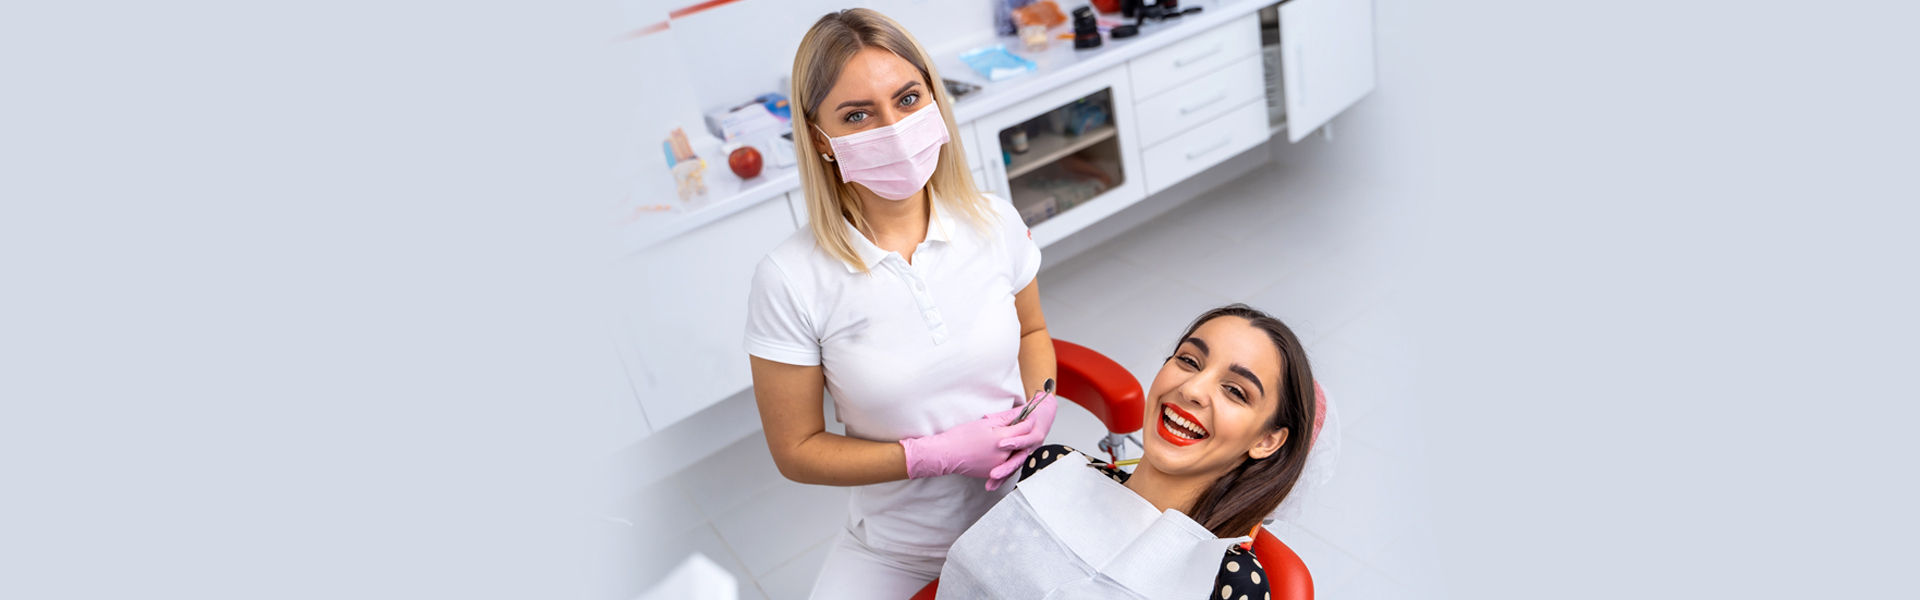 Dental Cleaning 101: What You Must Know for Your Dental Health